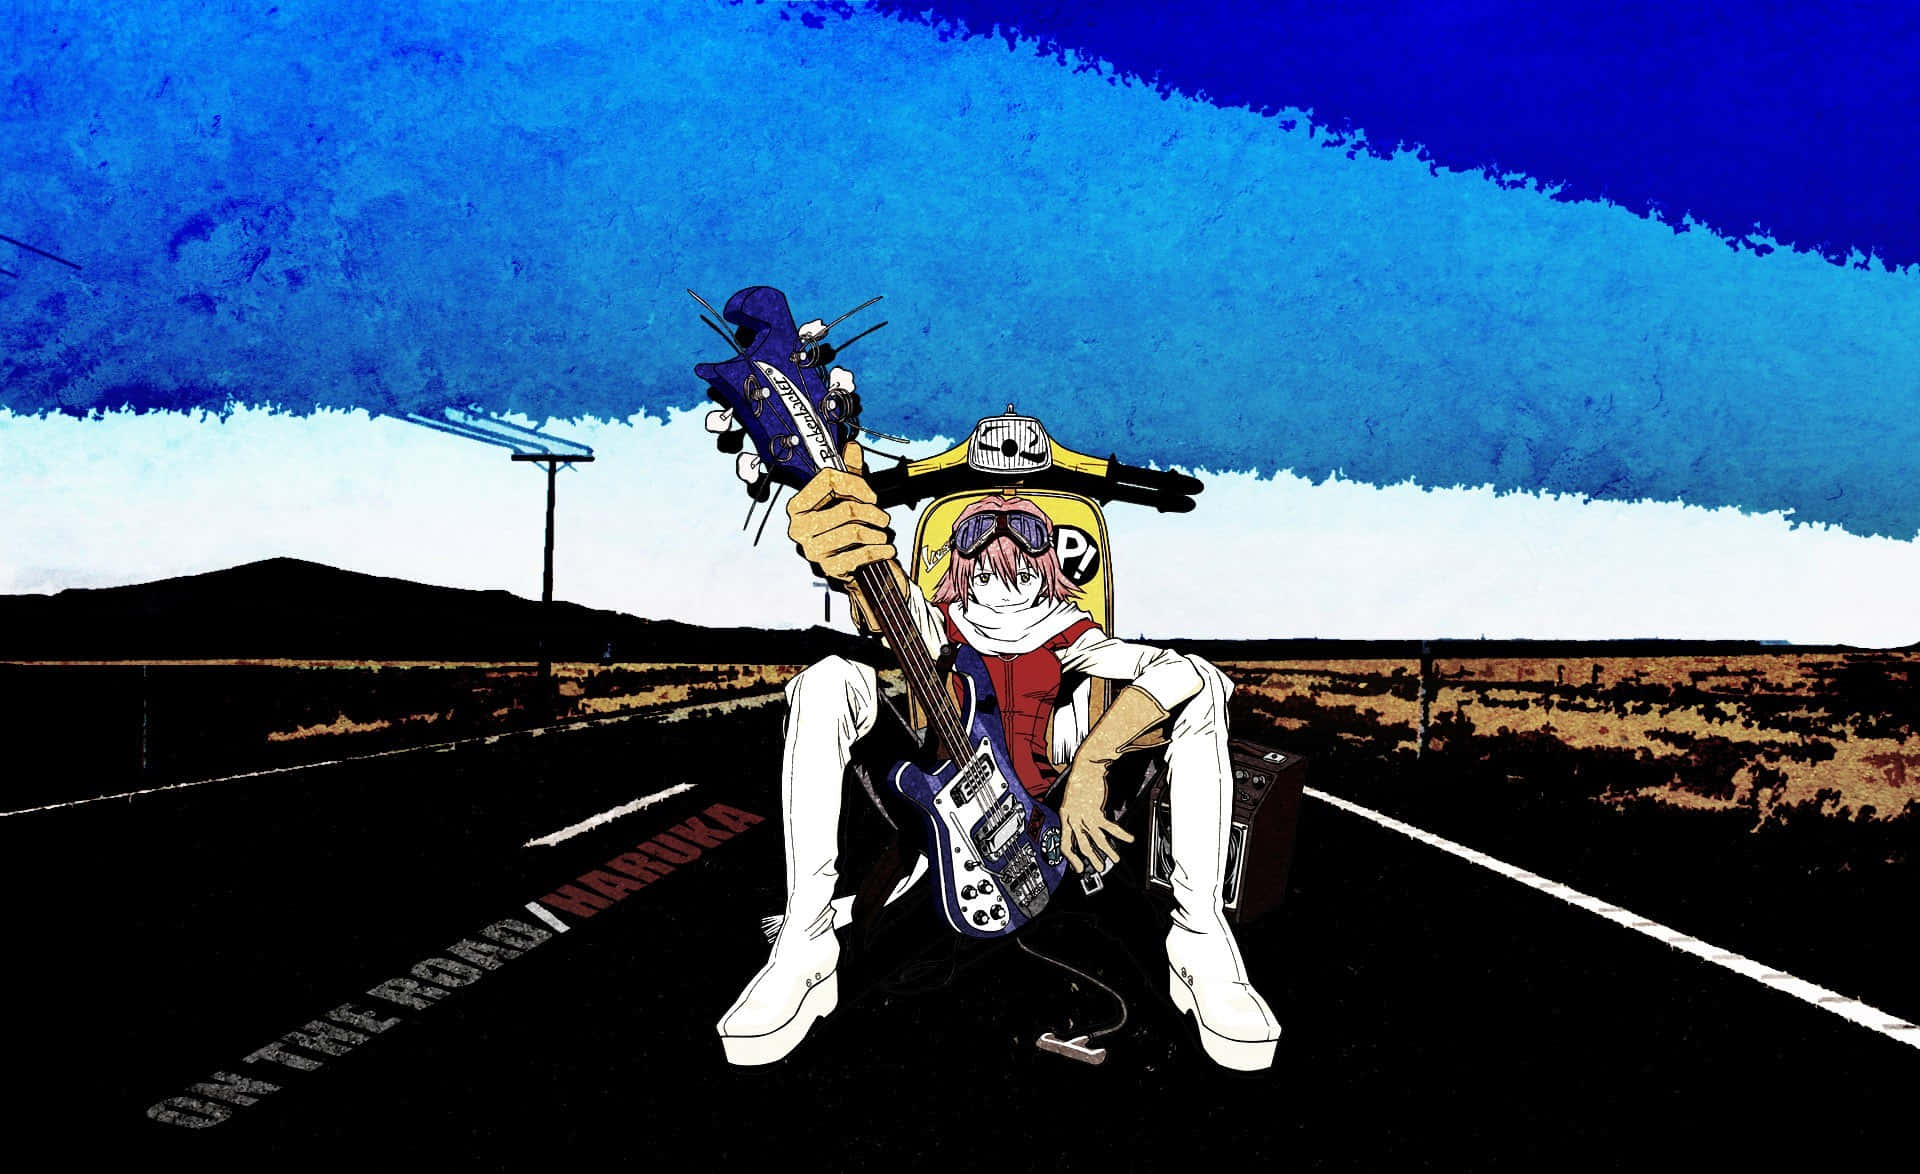 Haruko Haruhara posing with her guitar in an action-packed scene Wallpaper